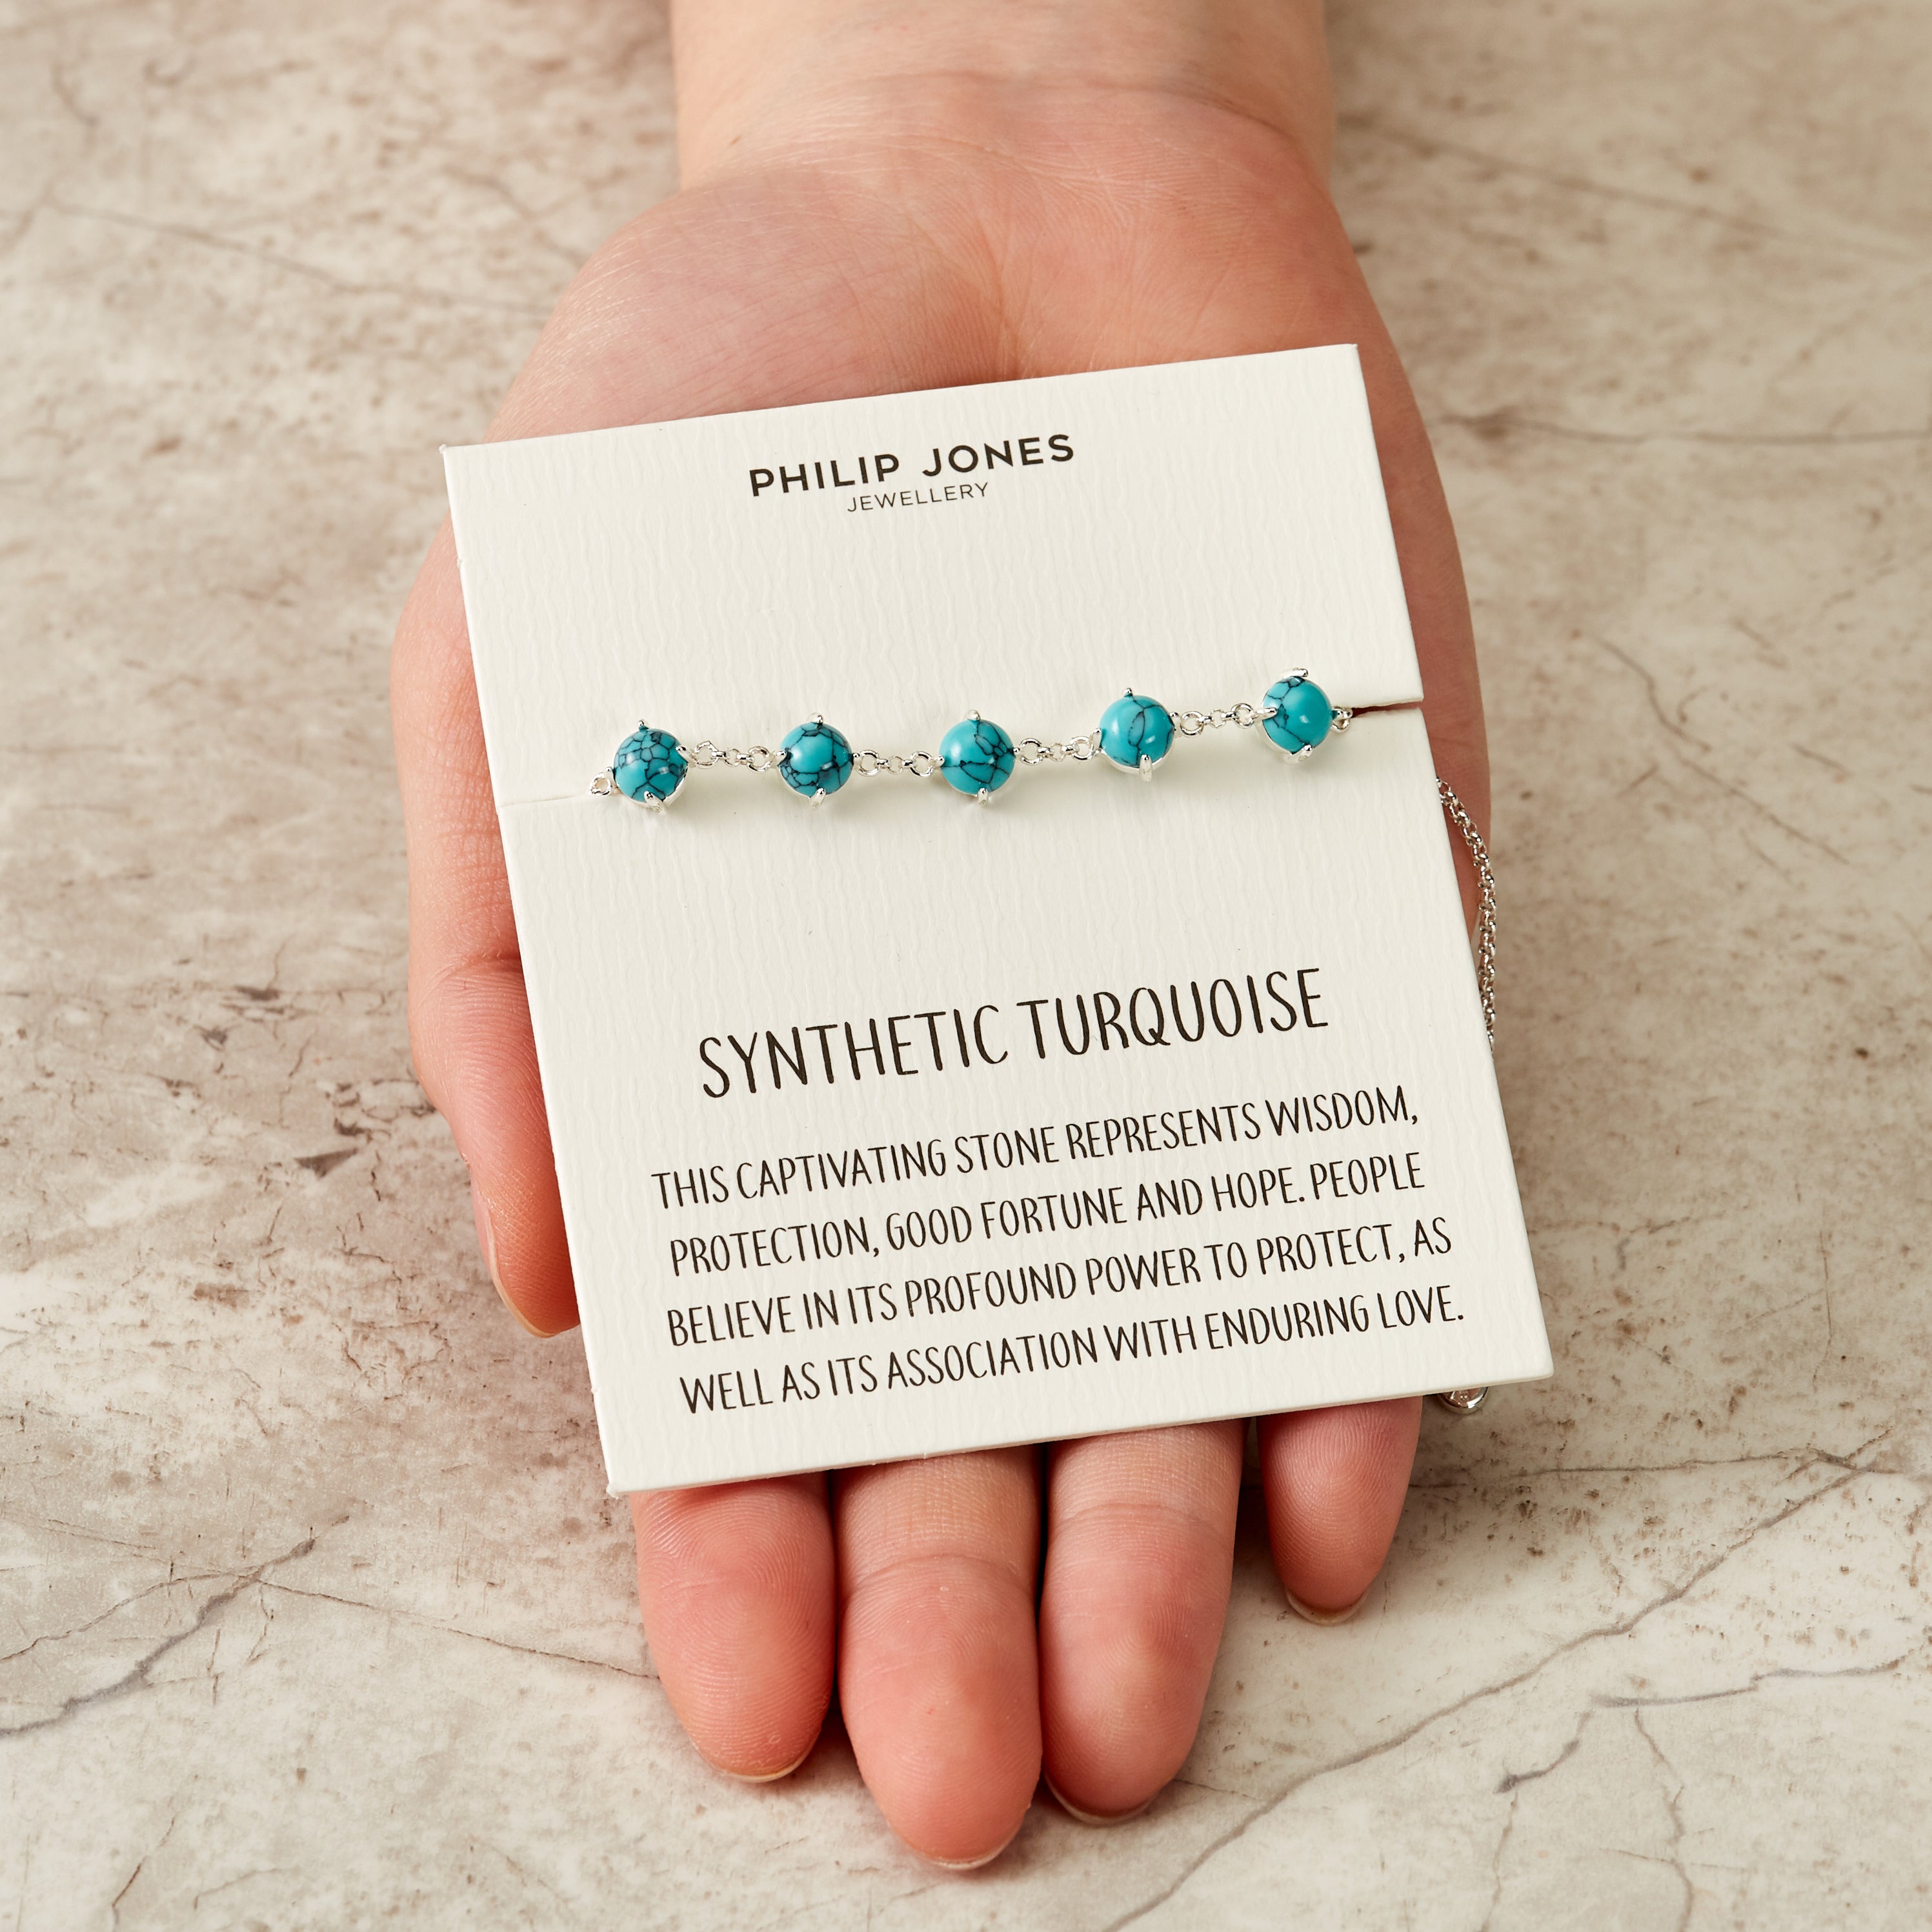 Synthetic Turquoise Gemstone Bracelet with Quote Card